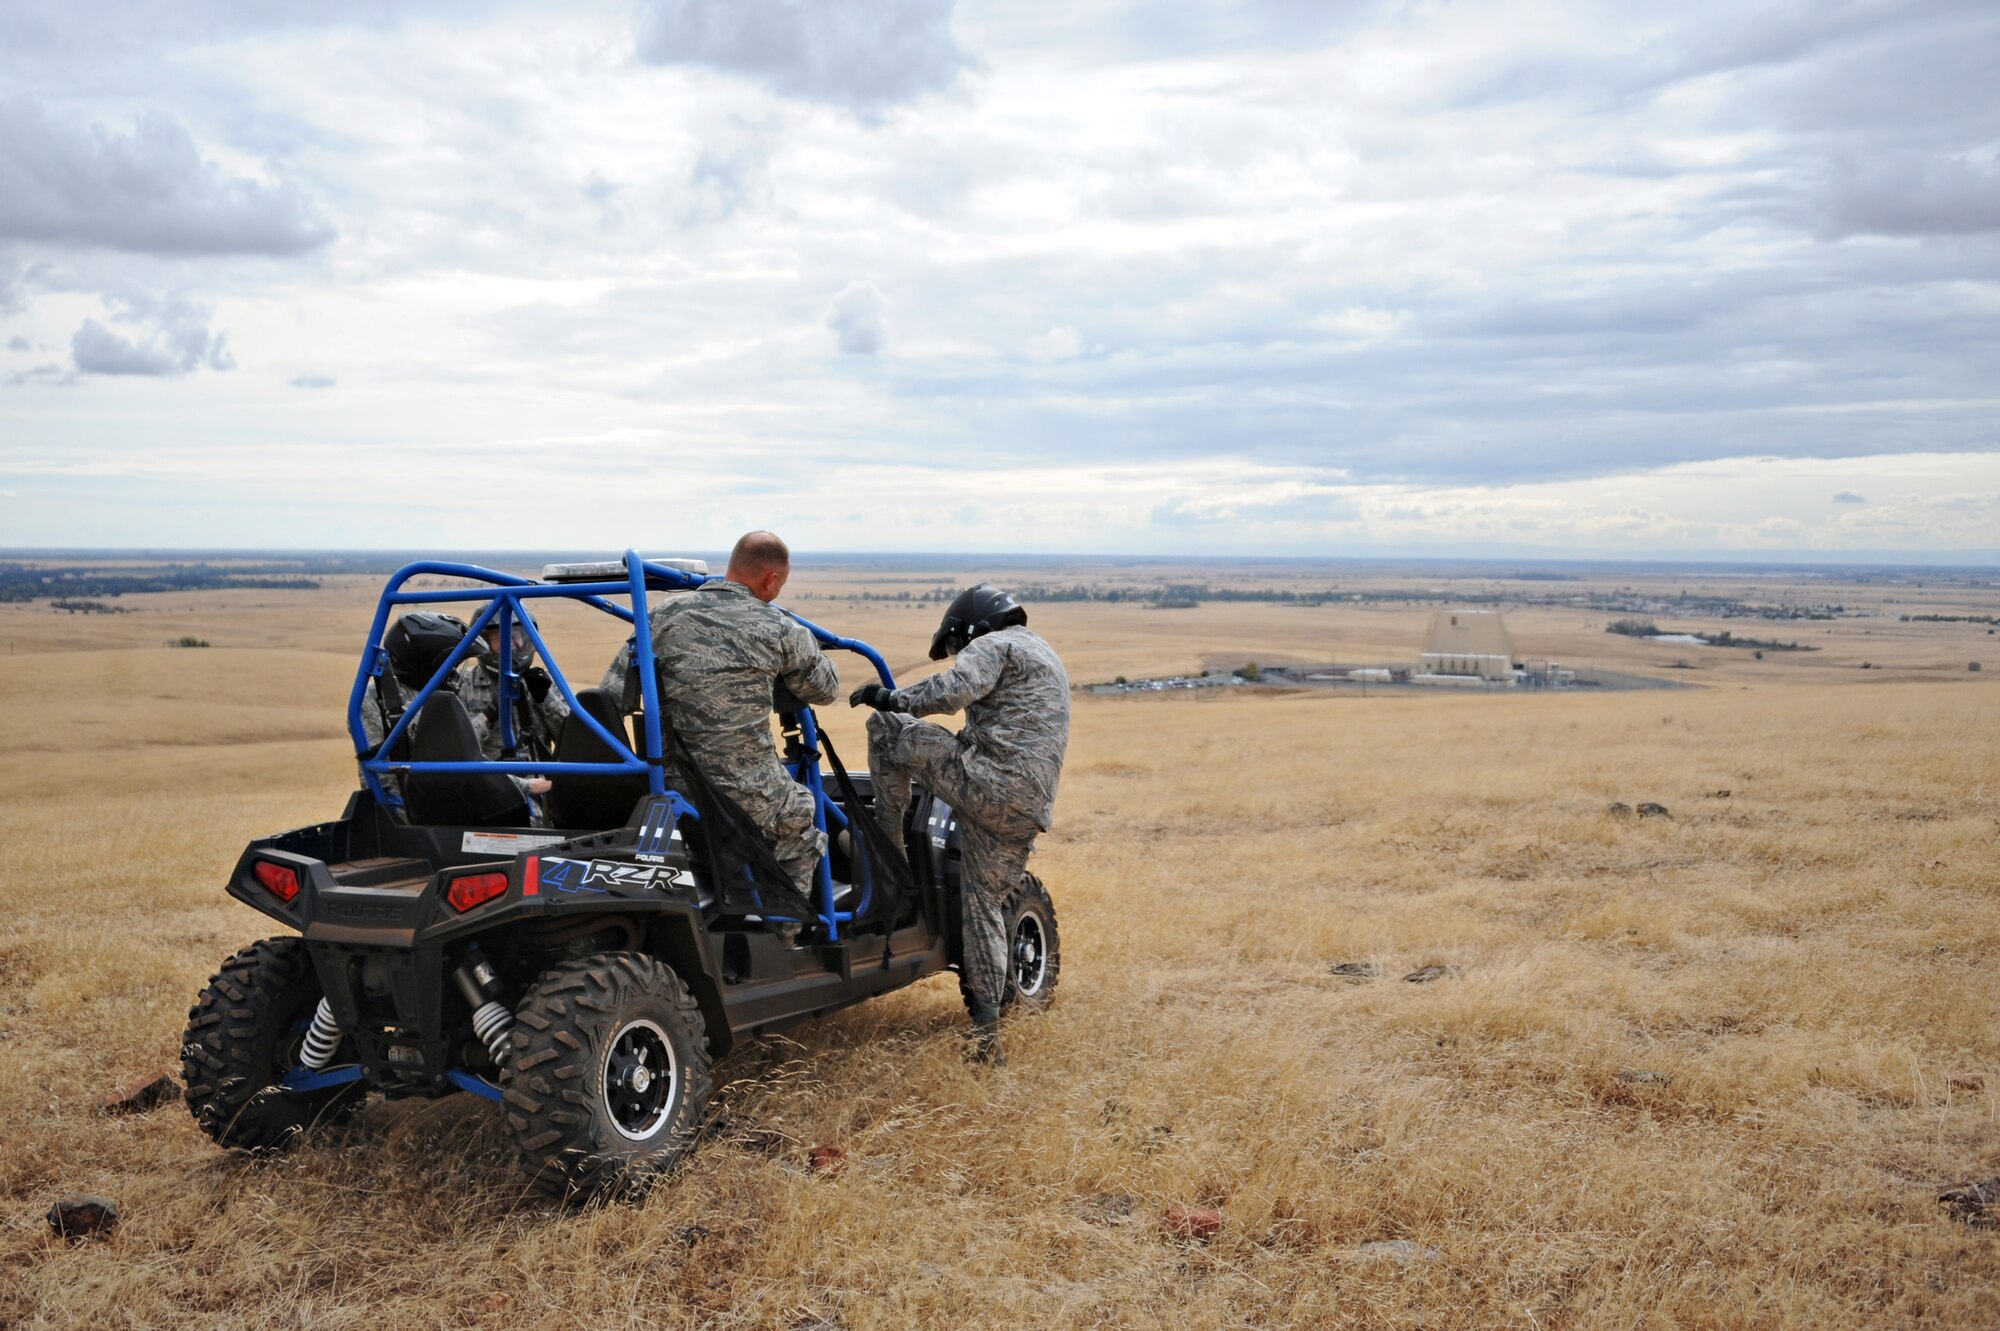 Maj. Gen. John Shanahan, 25th Air Force commander, exits an all-terrain vehicle on top of a hill to view the entire installation during his visit to the 9th Reconnaissance Wing at Beale Air Force Base, Calif., Oct. 15, 2014. Shanahan also rode along of the perimeter of the base with members of the 9th Security Forces Squadron. (U.S. Air Force photo by Airman 1st Class Ramon A. Adelan/Released)